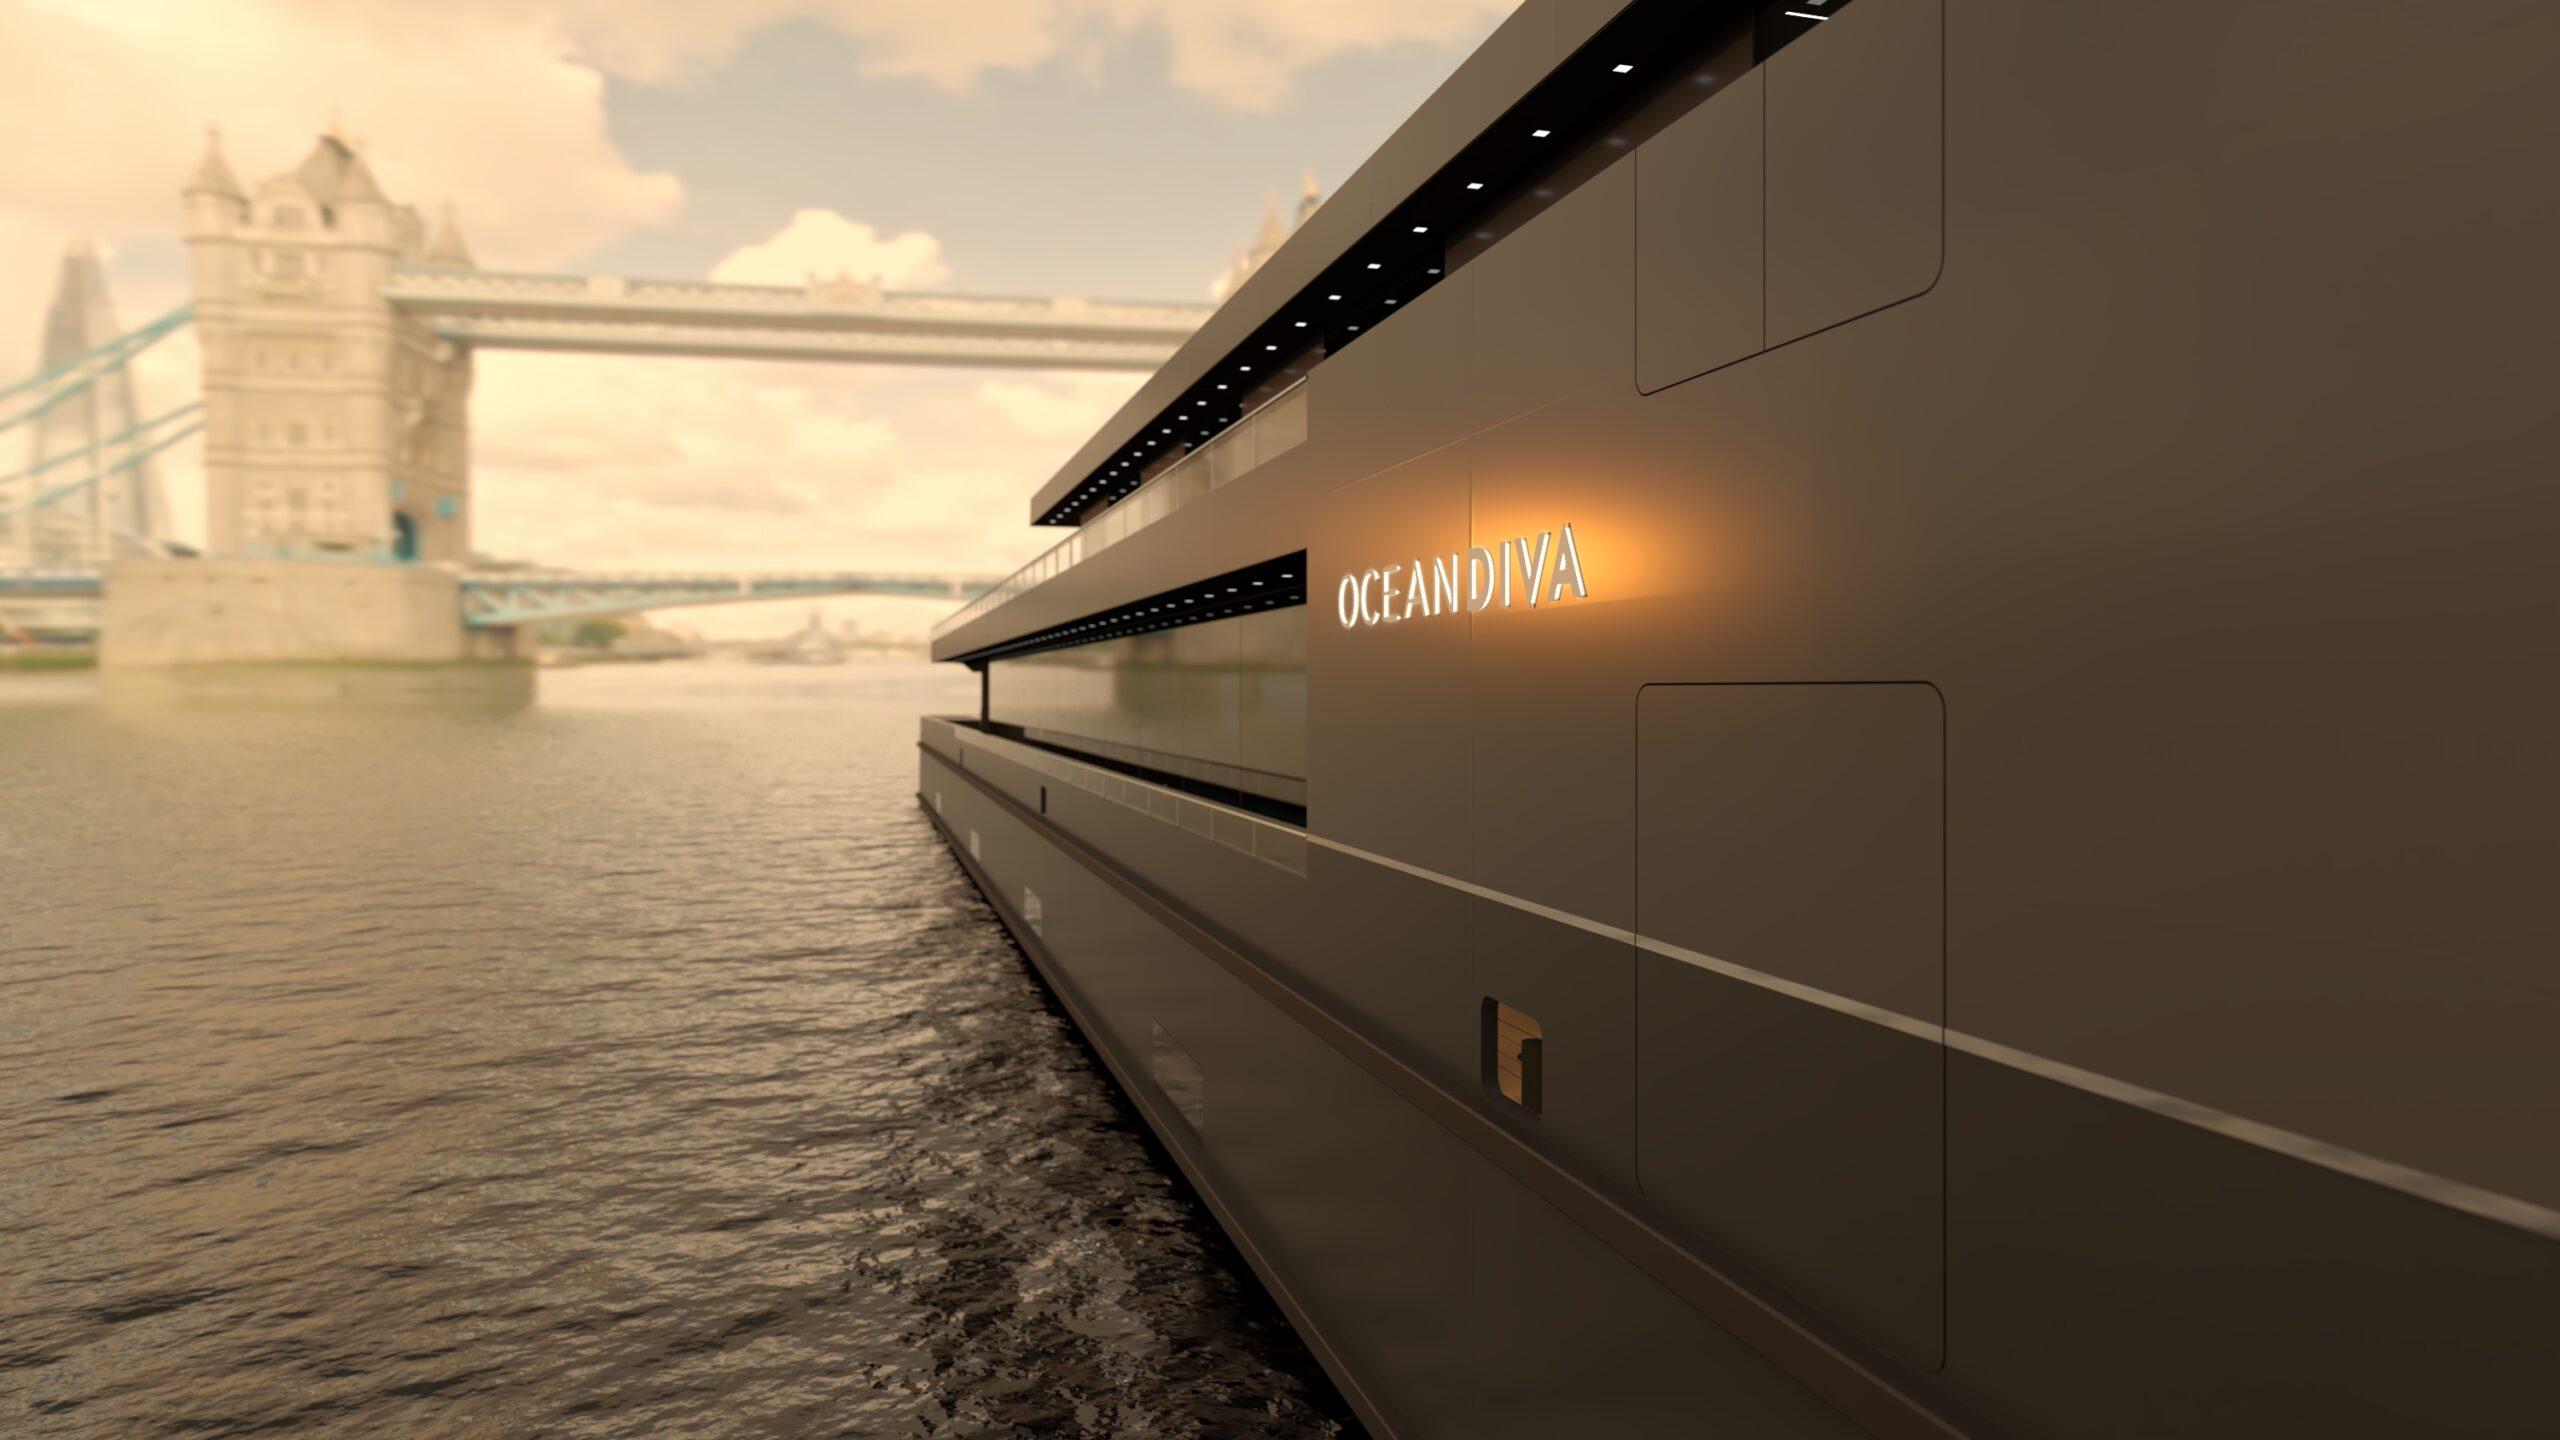 London is getting a £25 million party boat on the River Thames